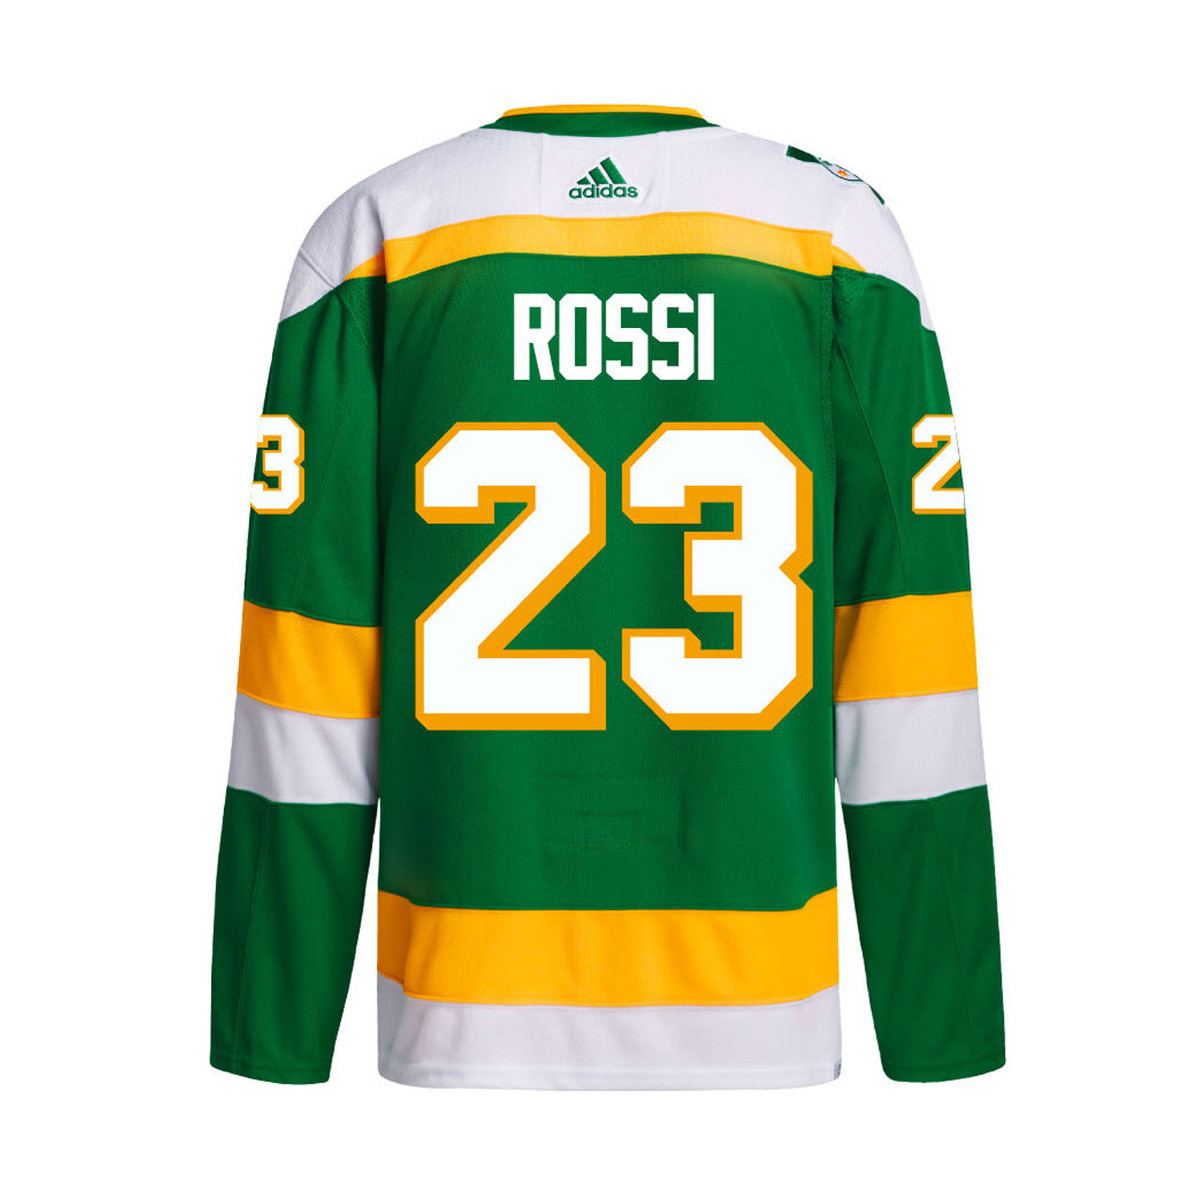 Alternate adidas Authentic Marco Rossi Jersey